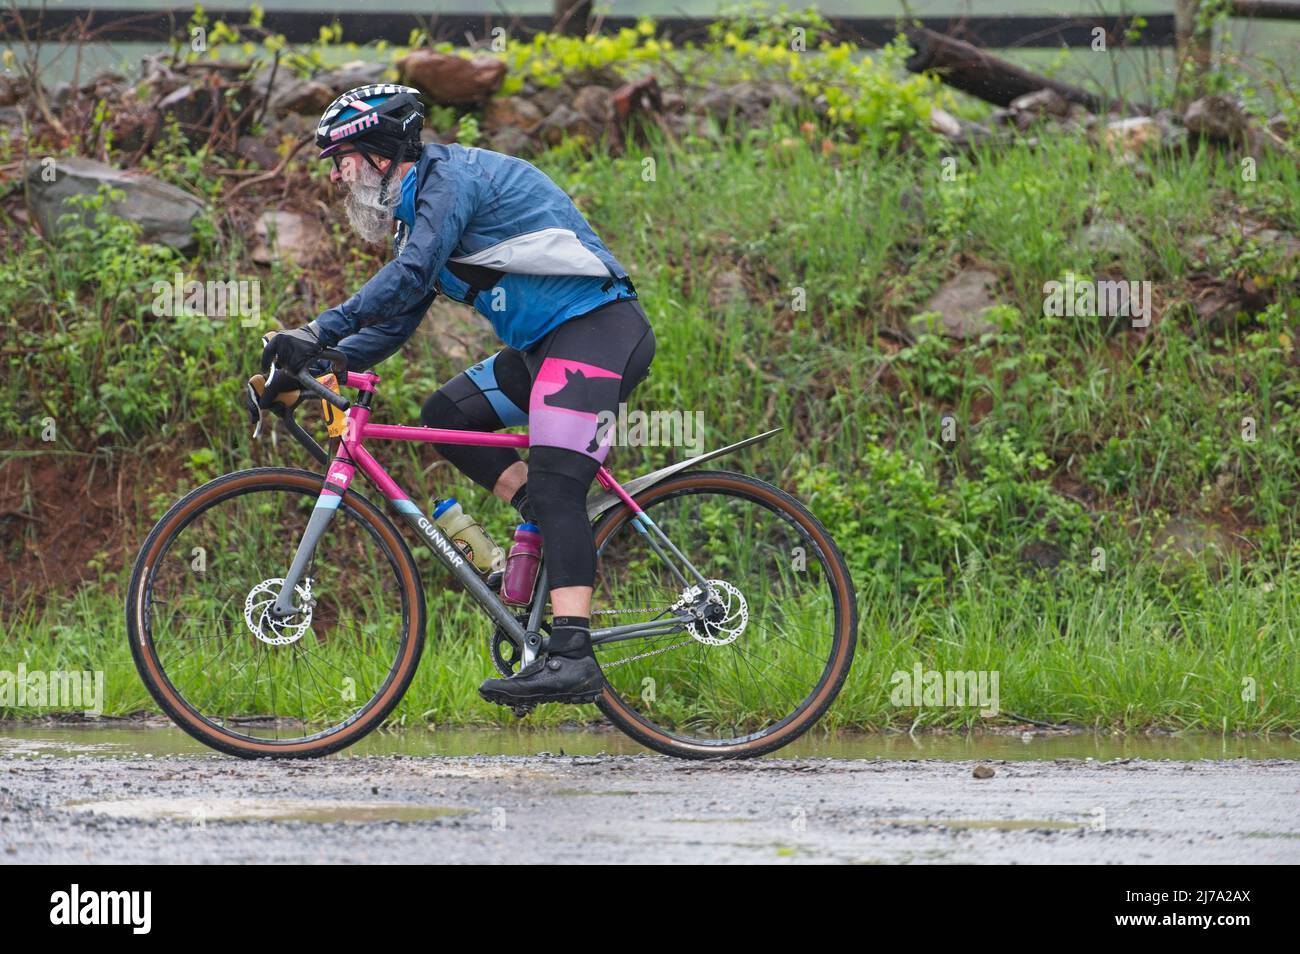 May 7, 2022: Gravel Grinder National Championships raced today in Western Loudoun. Riders were faced with epic weather in the form of rain, wind and c Stock Photo